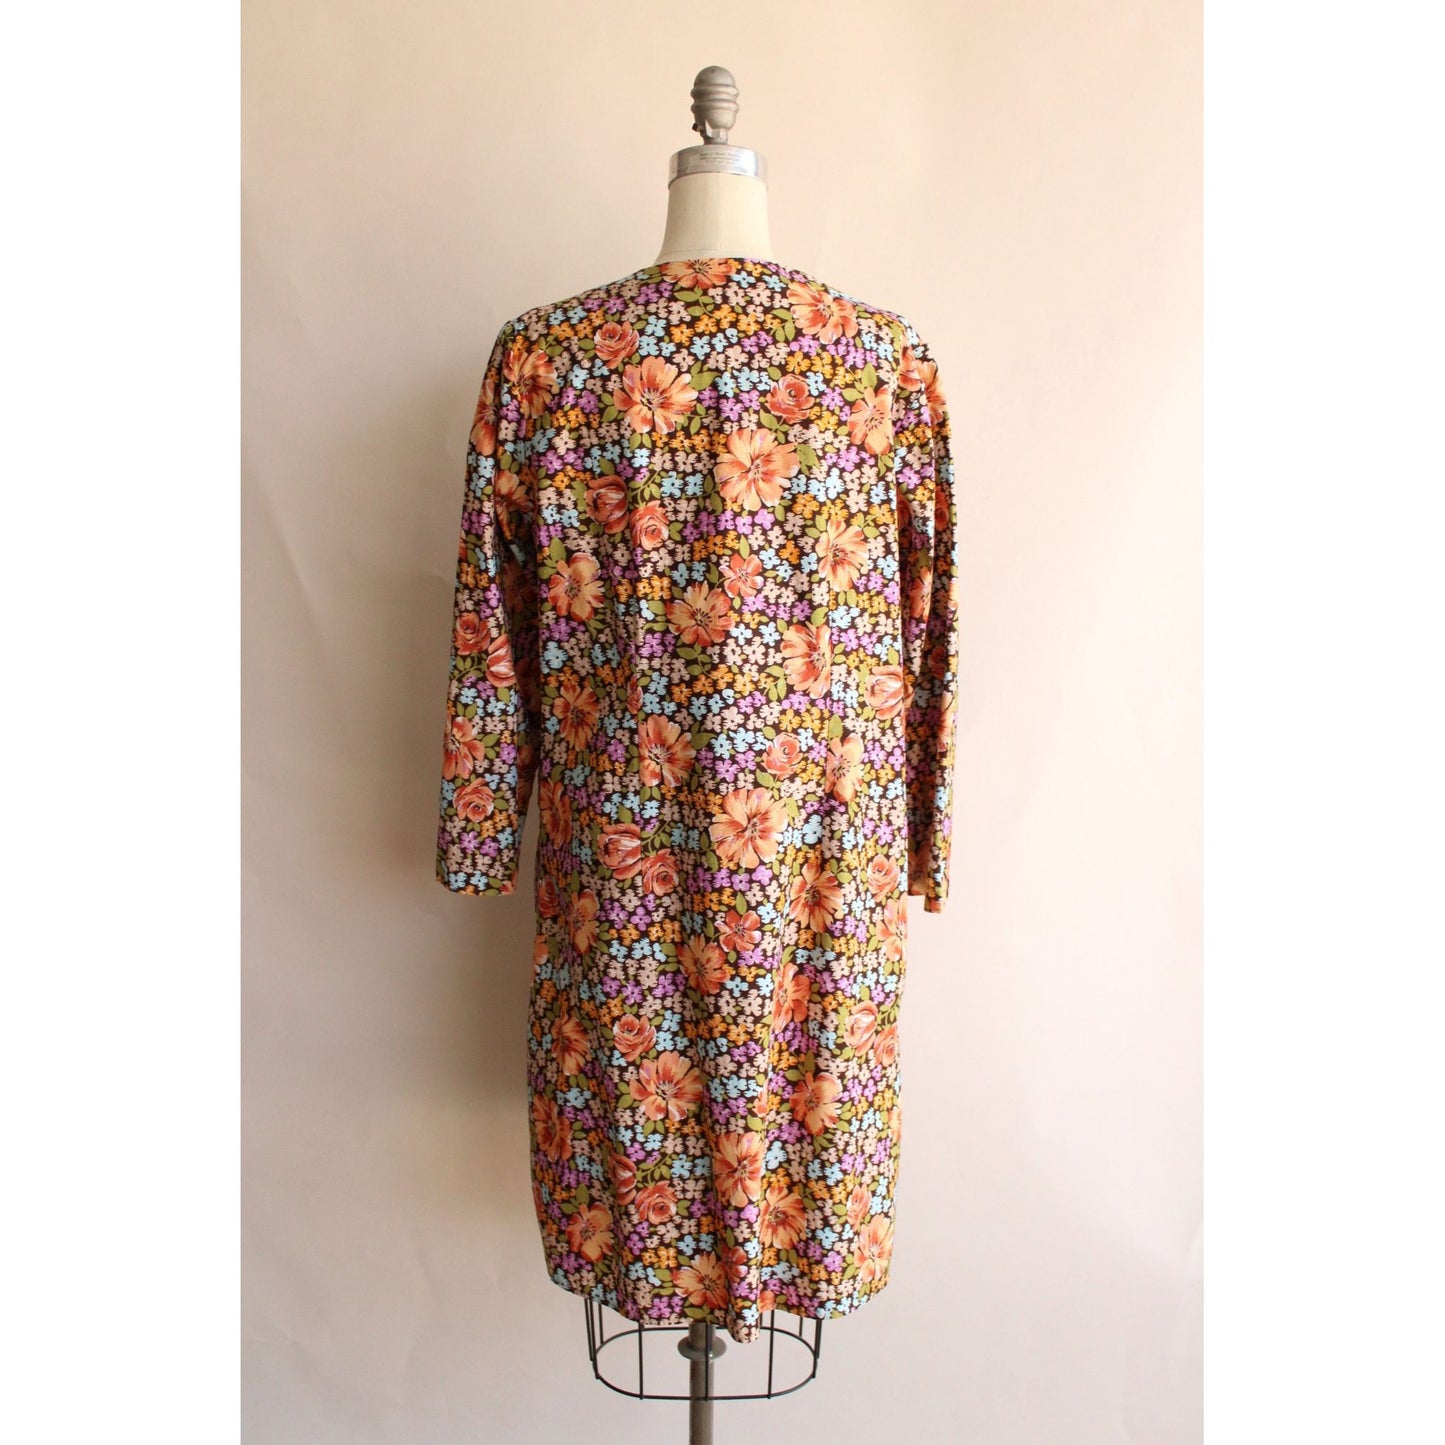 Vintage 1960s Floral Print Housecoat with Pockets